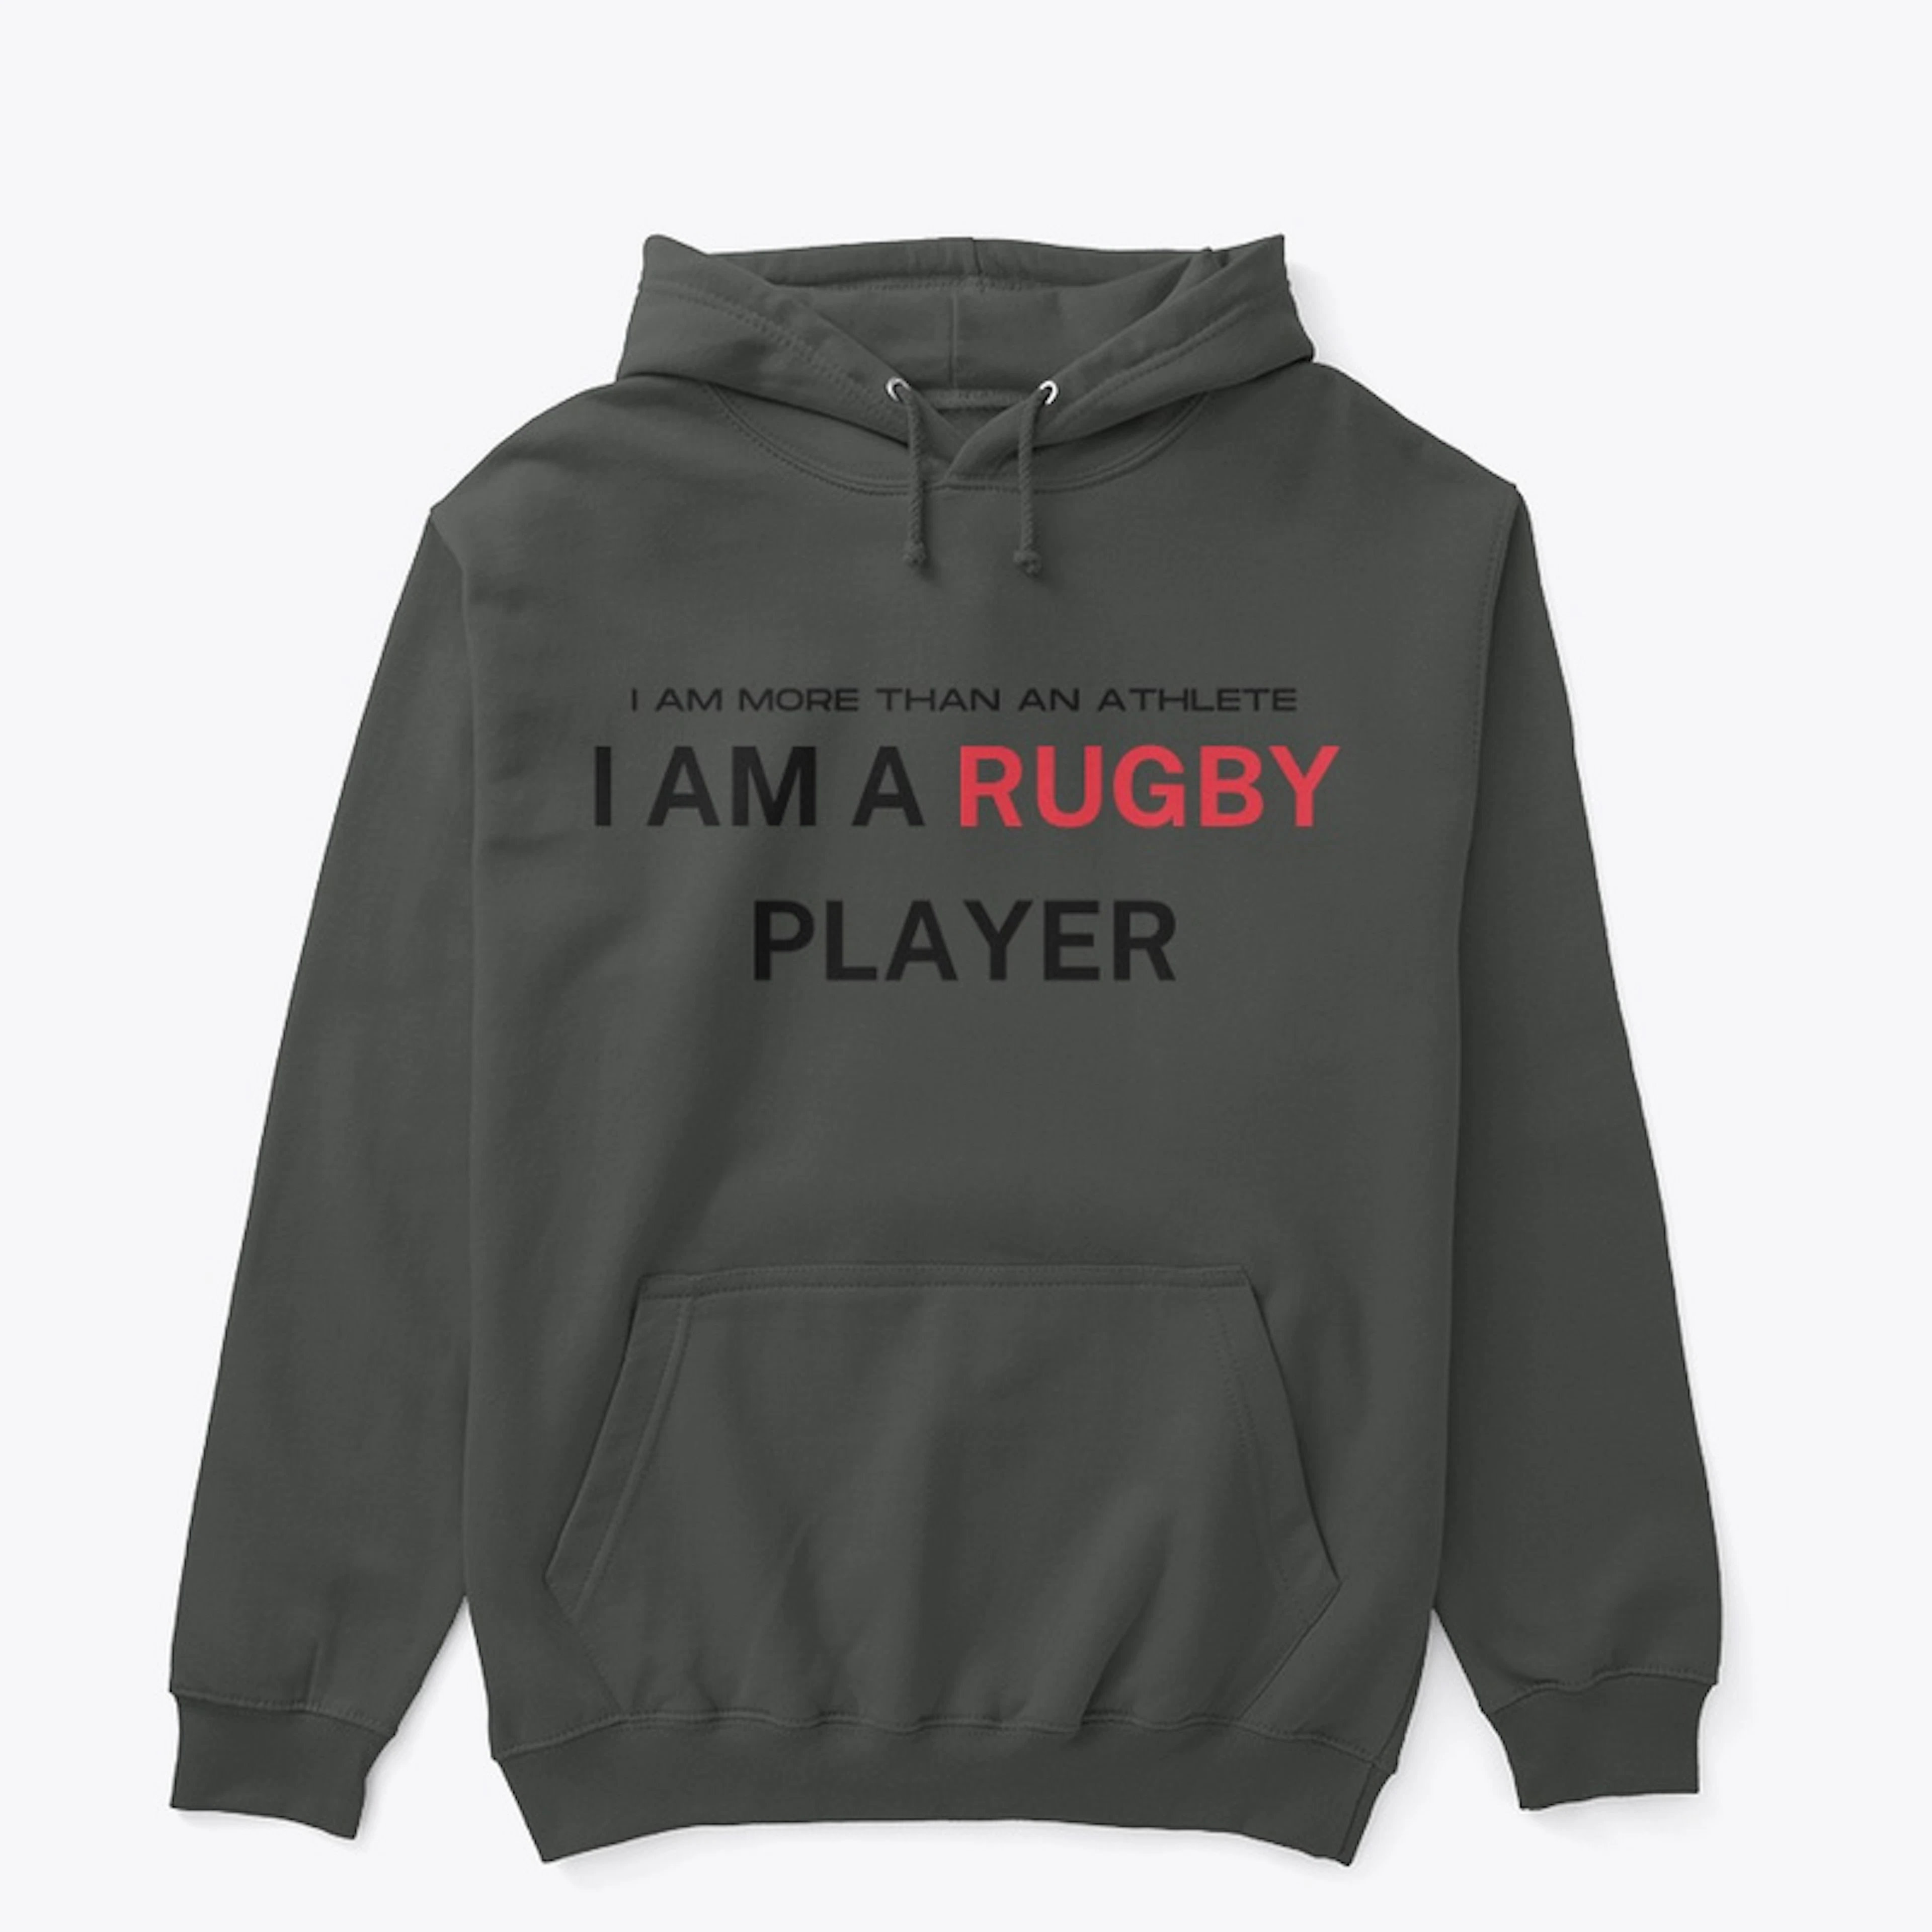 I am a Rugby Player